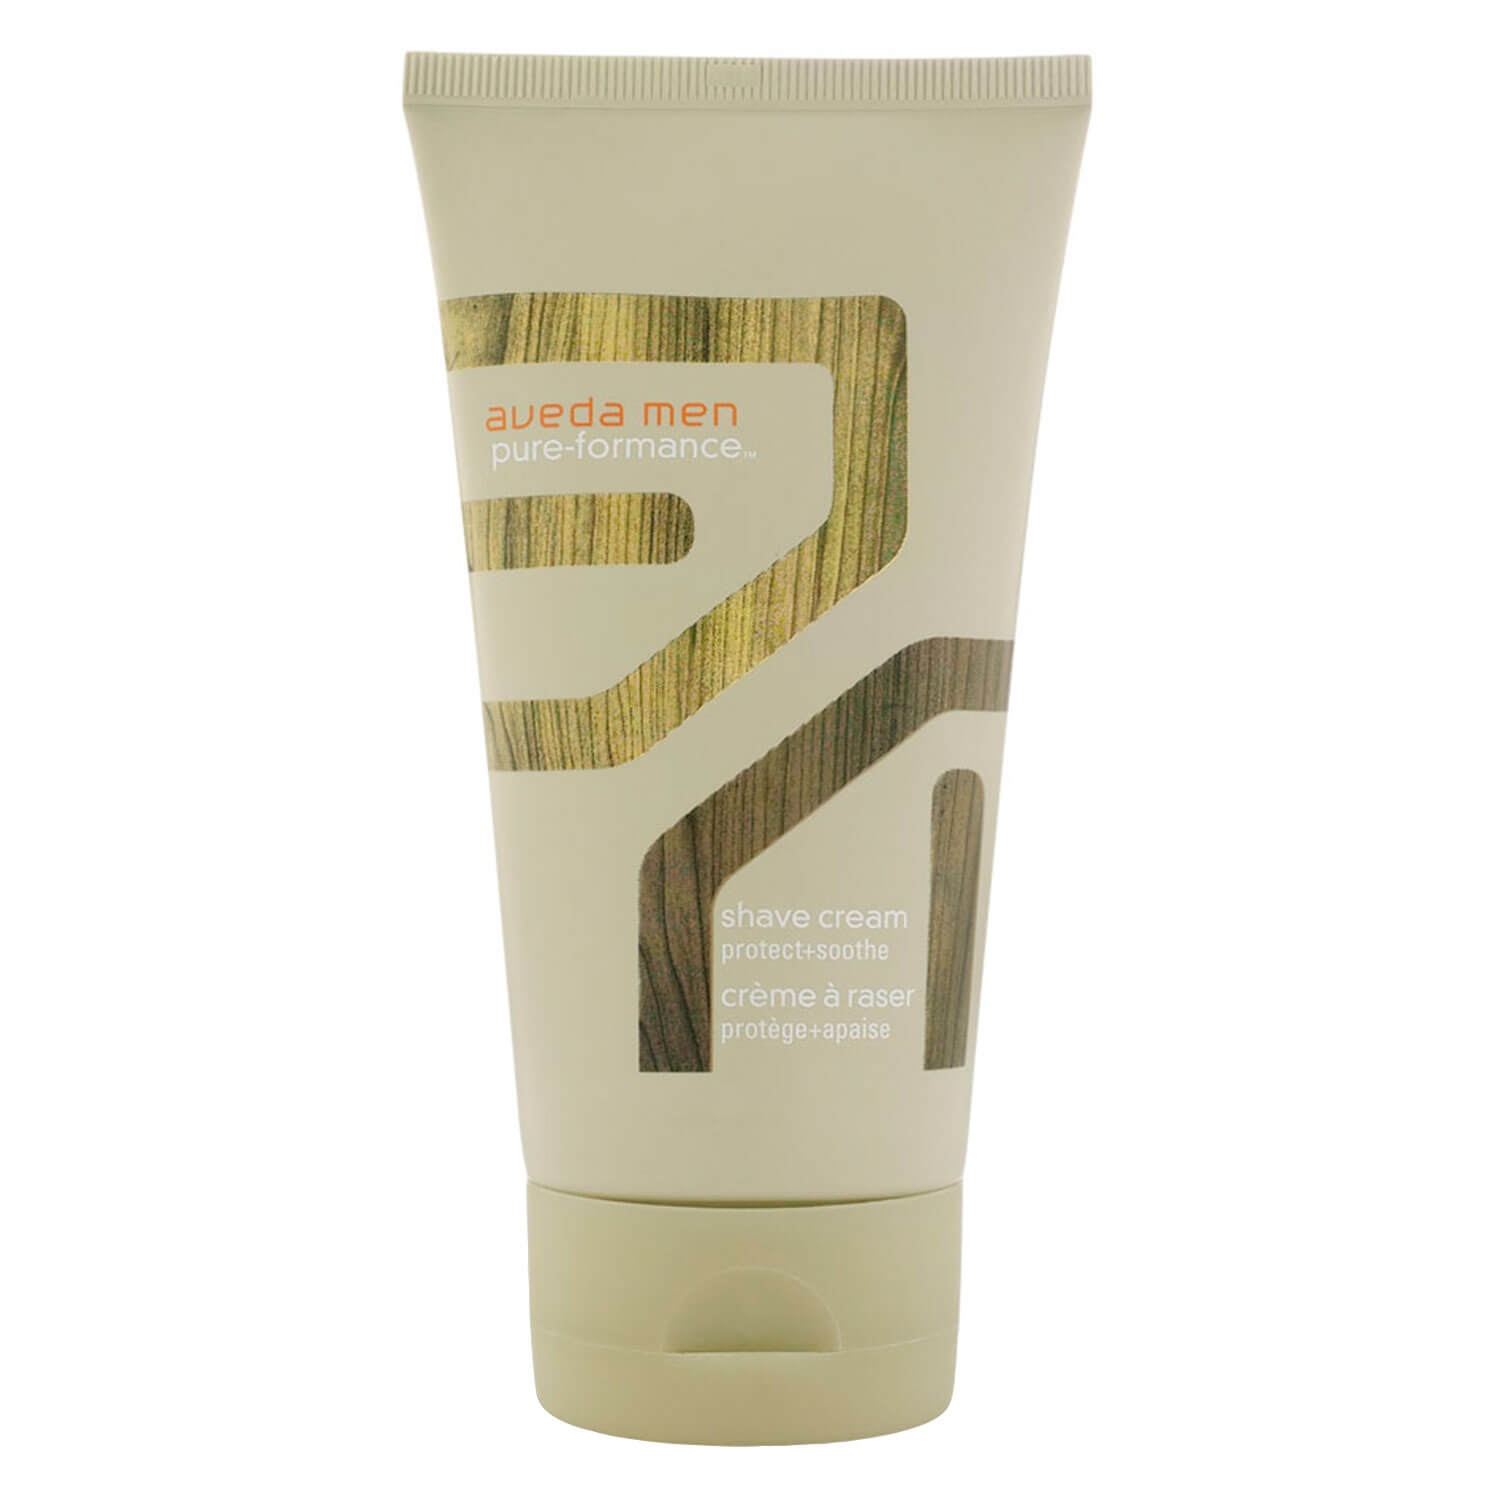 Product image from men pure-formance - shave cream